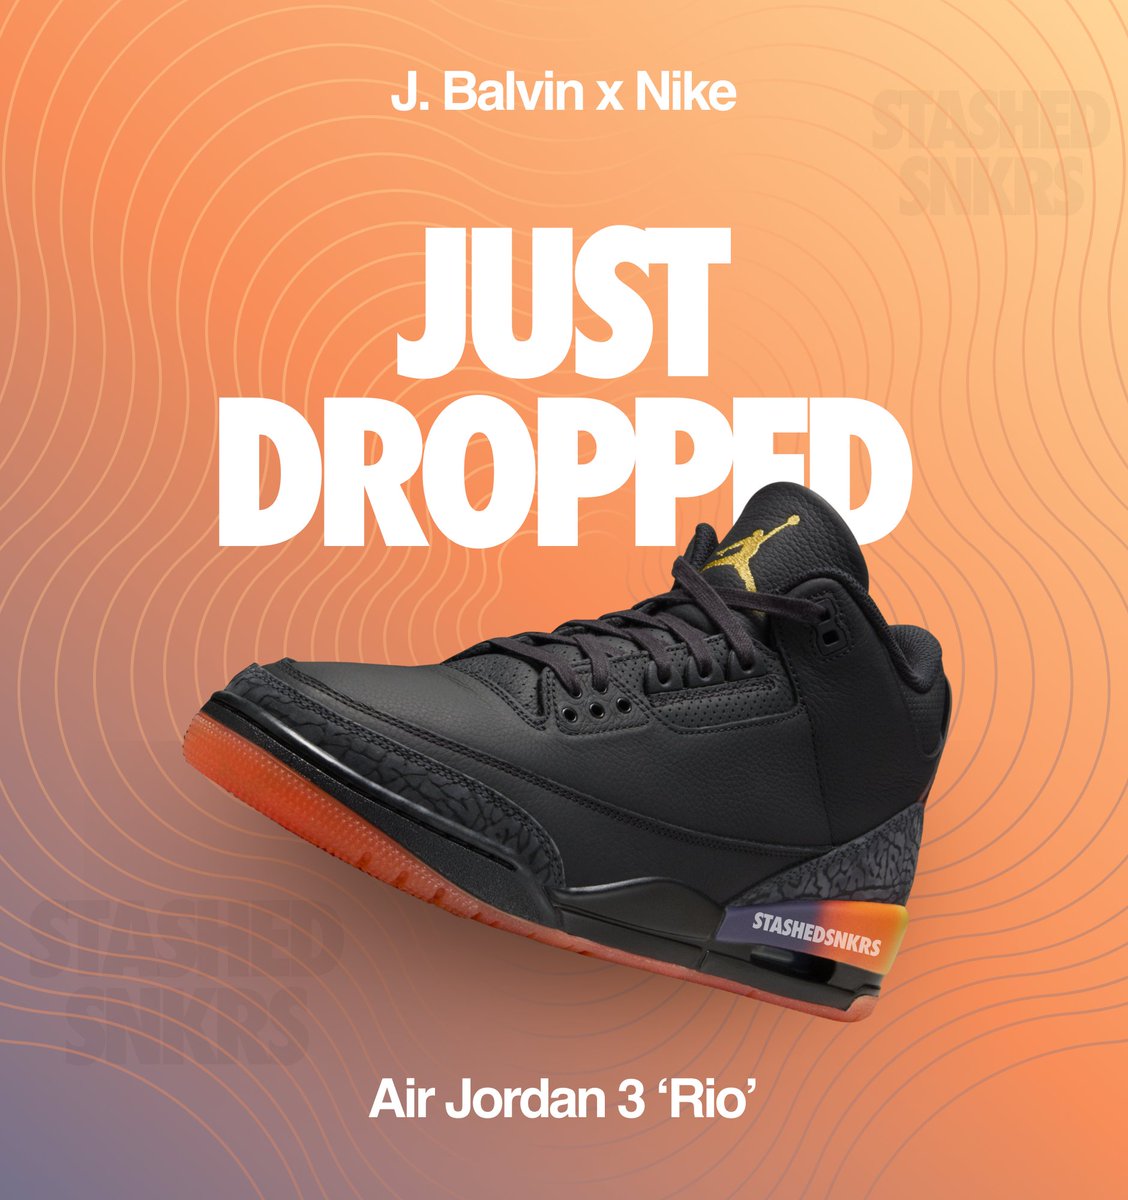 The J Balvin x Air Jordan 3 ‘Rio’ just dropped on the SNKRS App via SNKRS Pass in Milan. 🇮🇹 If you were a Stashed member, you had an early heads-up. The SNKRS Pass went live at 10:15 AM CET and pickup is tomorrow, were you able to secure a pair⁉️